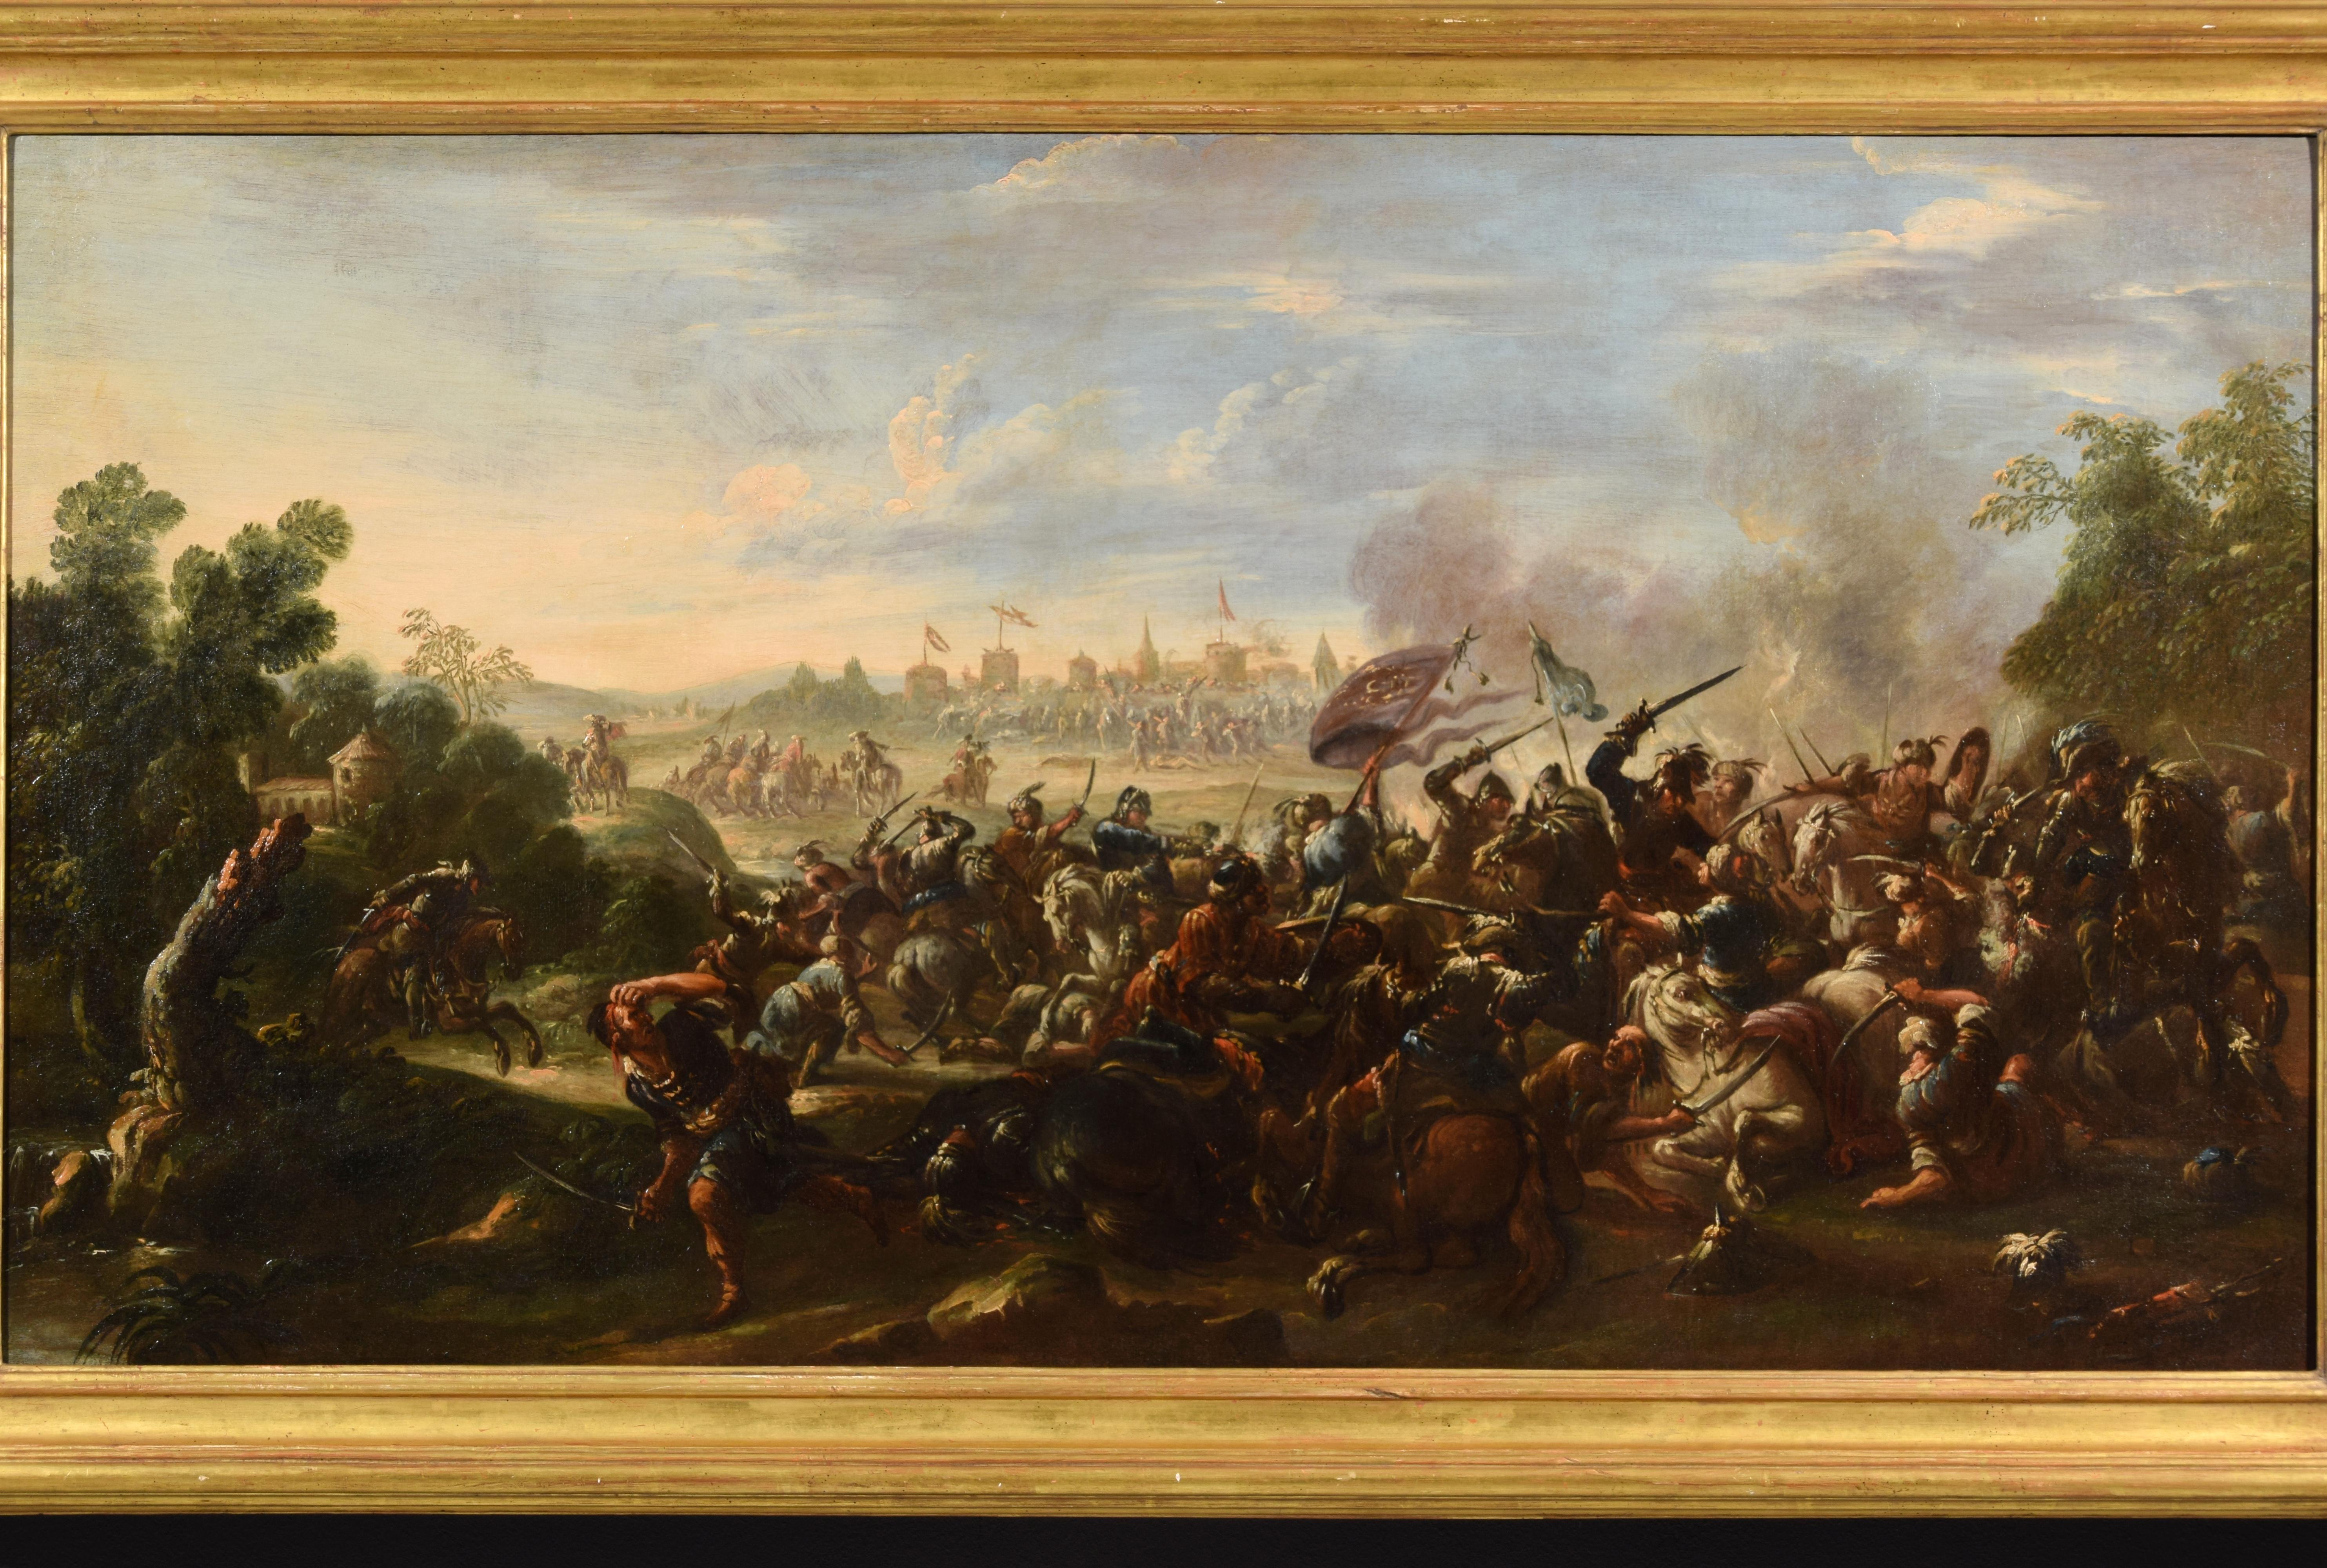 17th century, Italian oil on canvas painting with battle between Christian and Turkish cavalry

The oil on canvas painting depicts a battle between Christian and Turkish cavalry. Characterized by a strong dynamism, the main scene occupies the